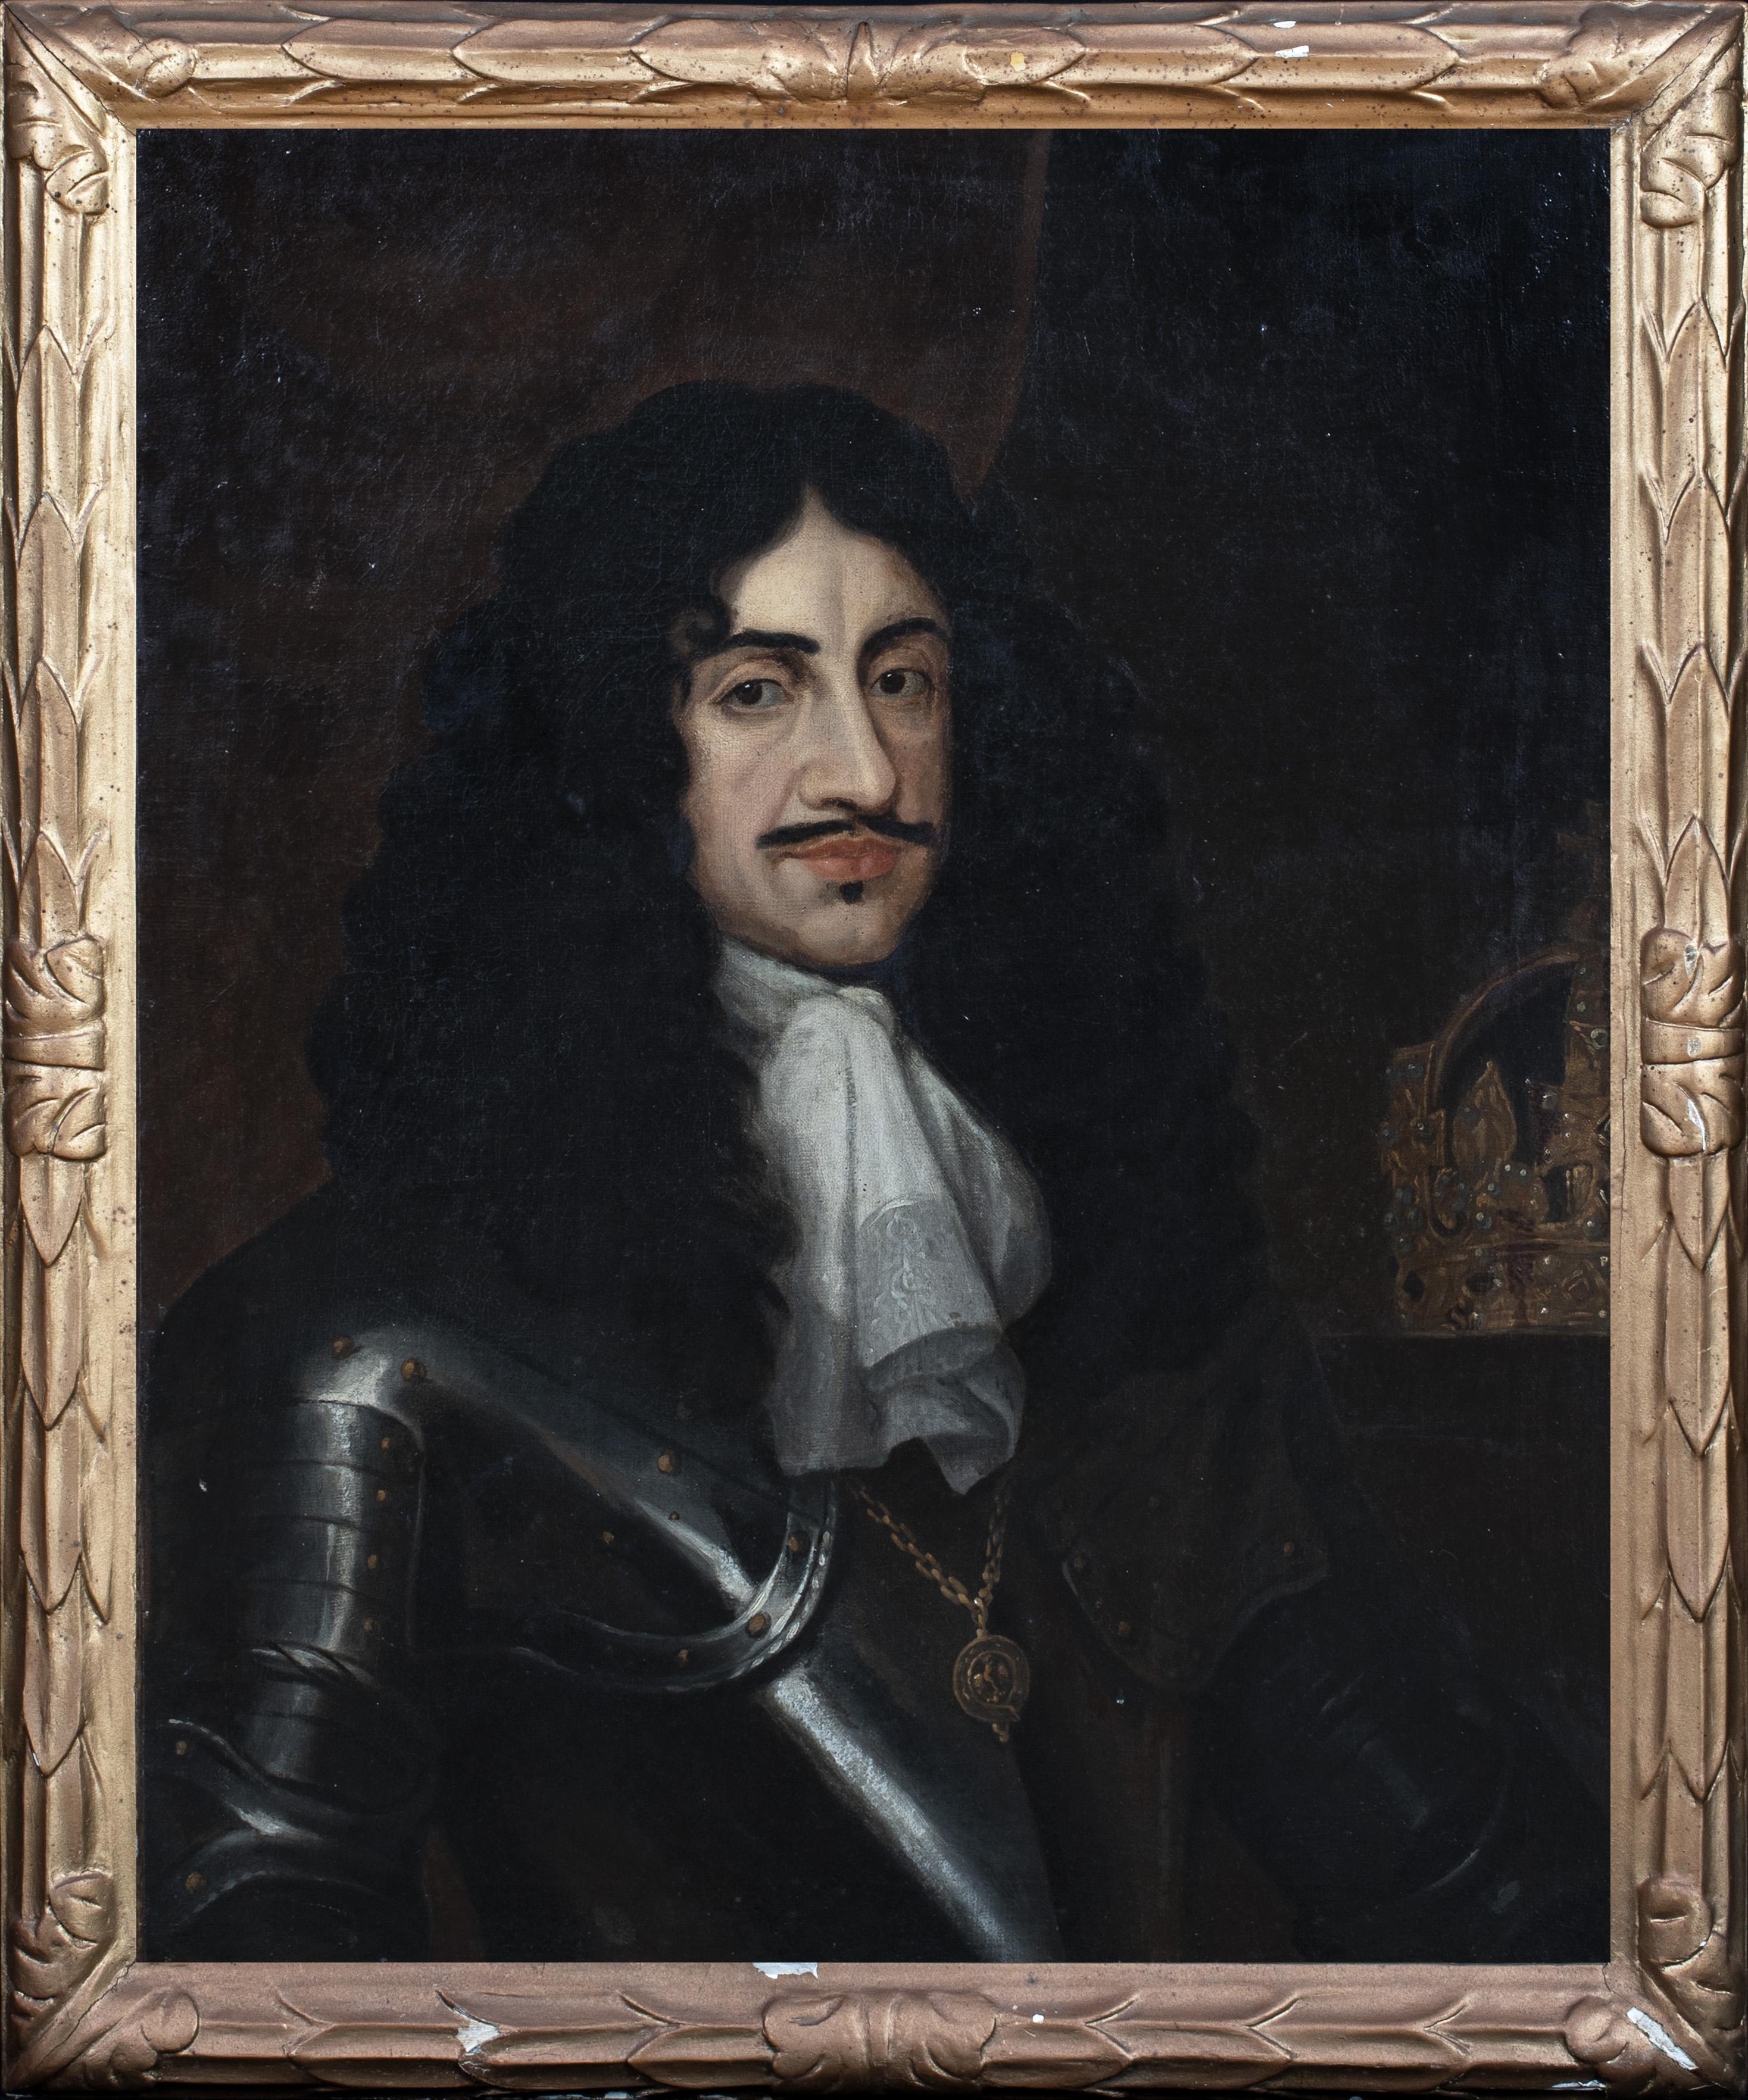 Portrait Of King Charles II (1630-1685), 17th Century  - Painting by Unknown